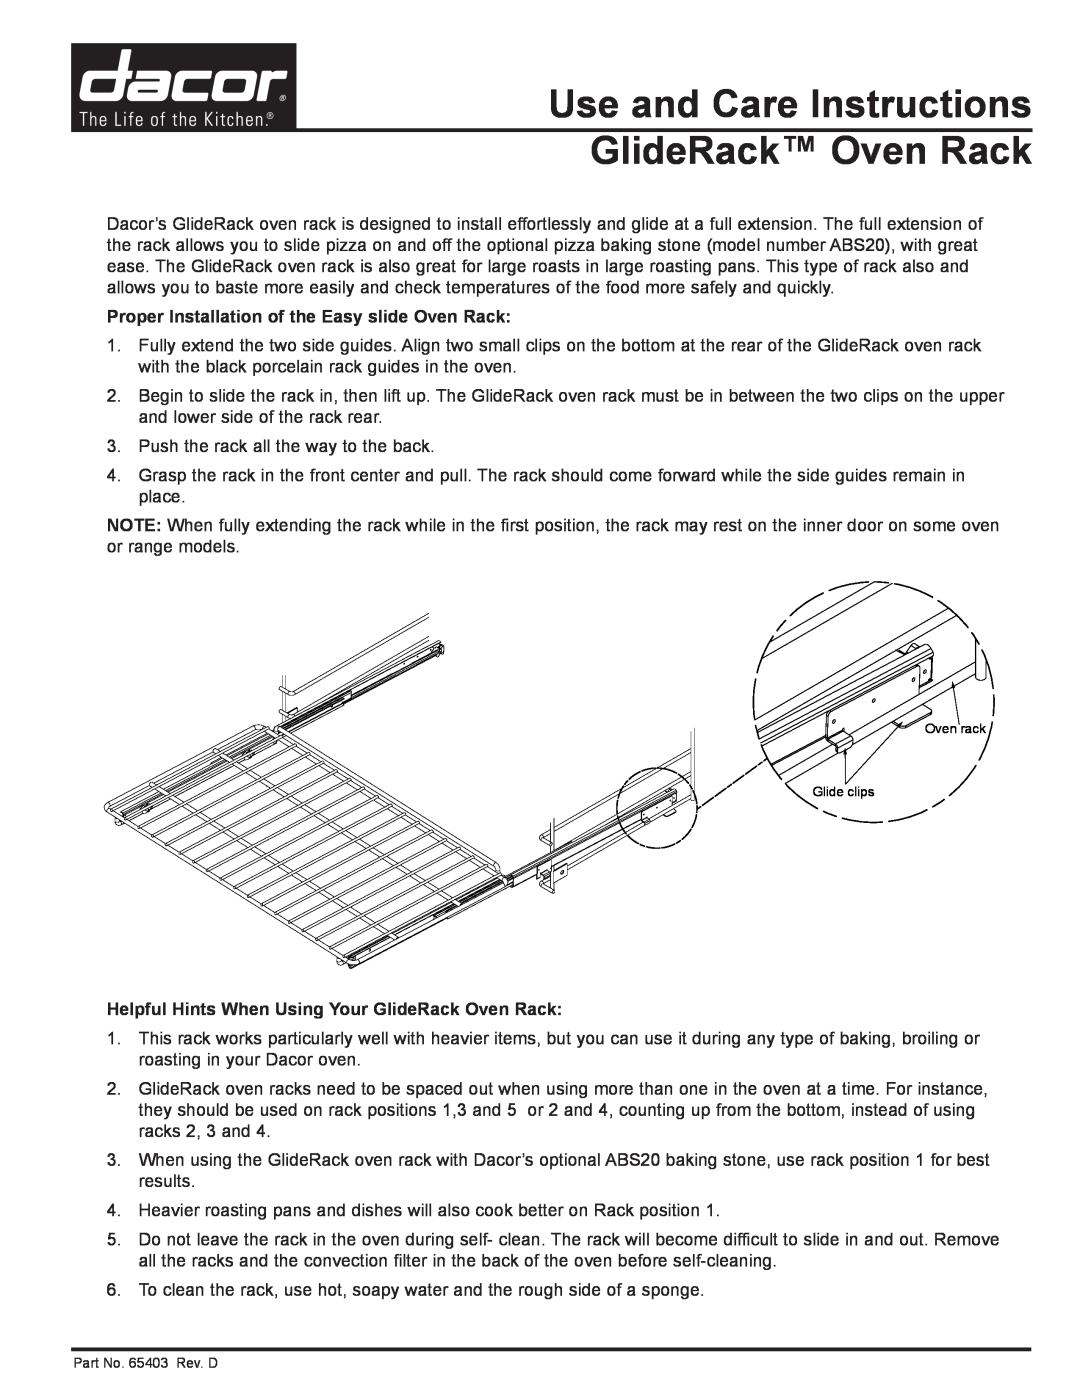 Dacor manual Use and Care Instructions GlideRack Oven Rack, Proper Installation of the Easy slide Oven Rack 